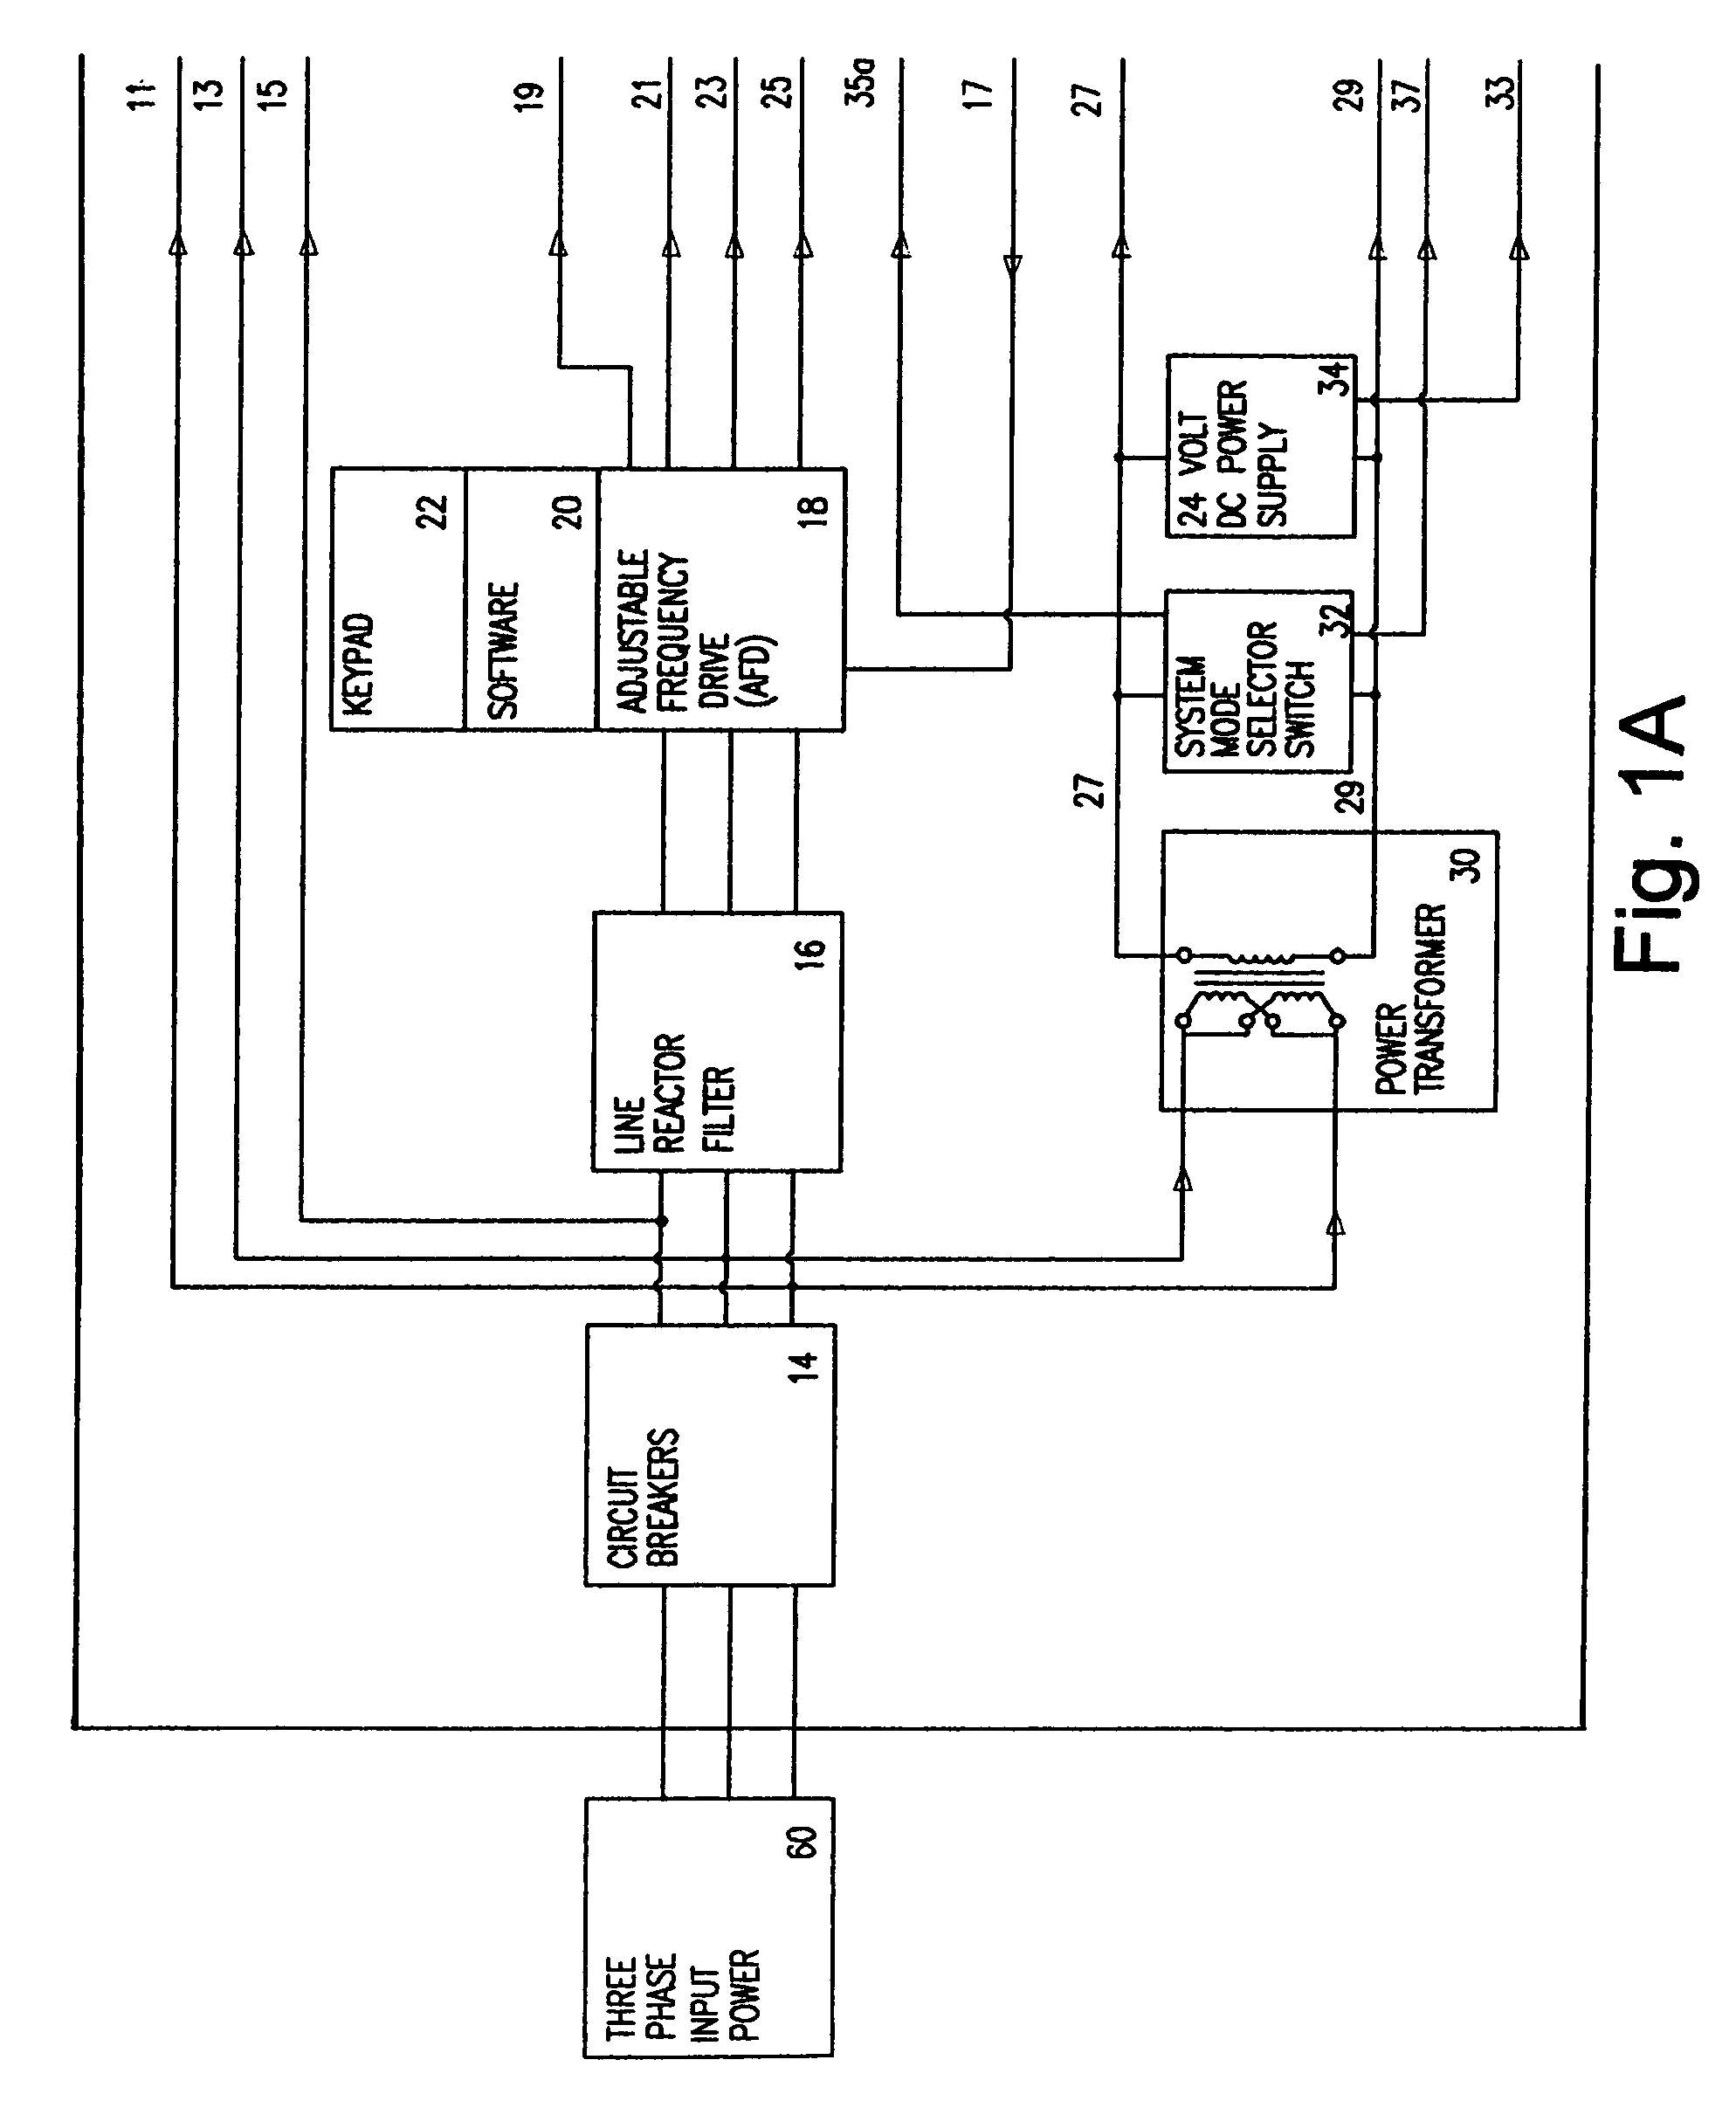 Adjustable frequency pump control system